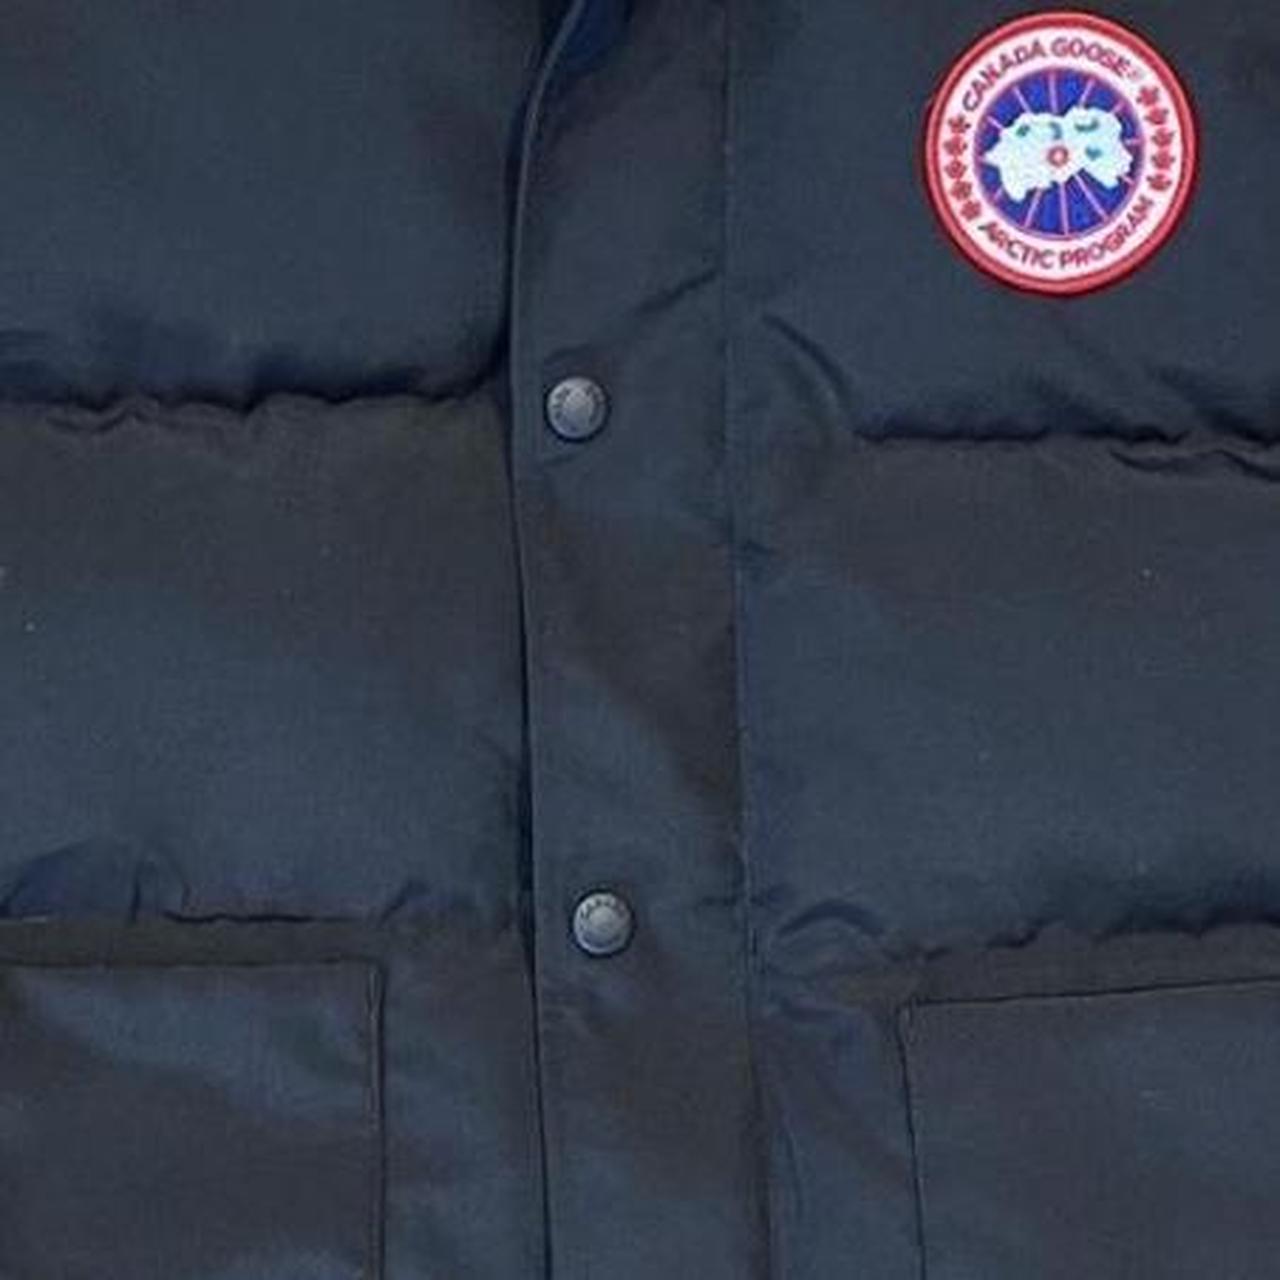 Brand new not used Canada goose gilet. Need gone. - Depop